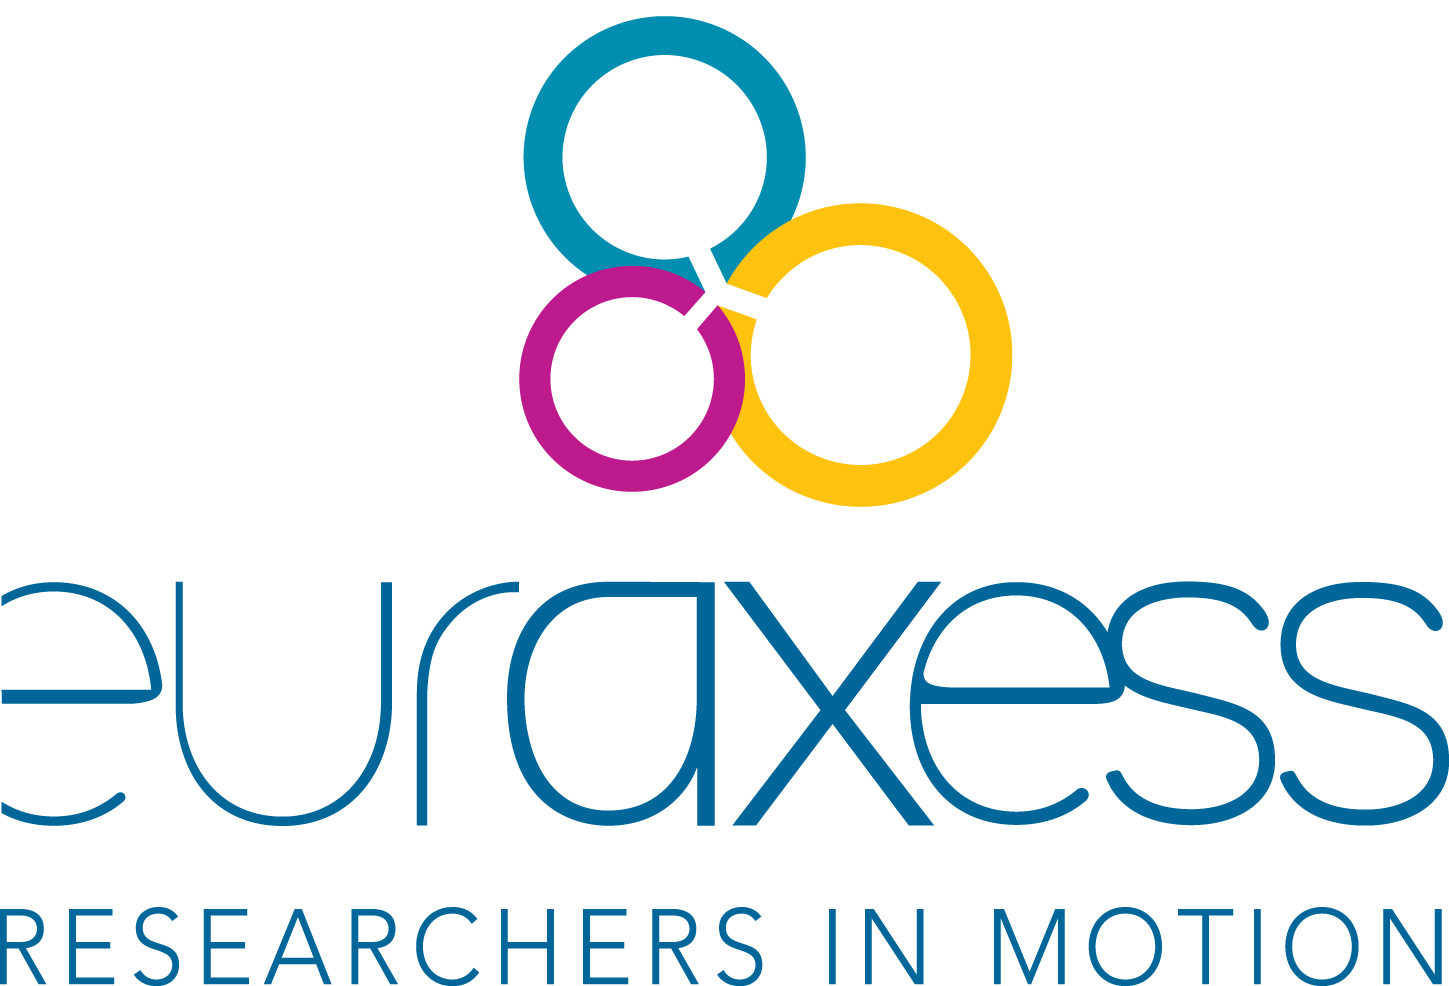 euraxess-researchers-in-motion